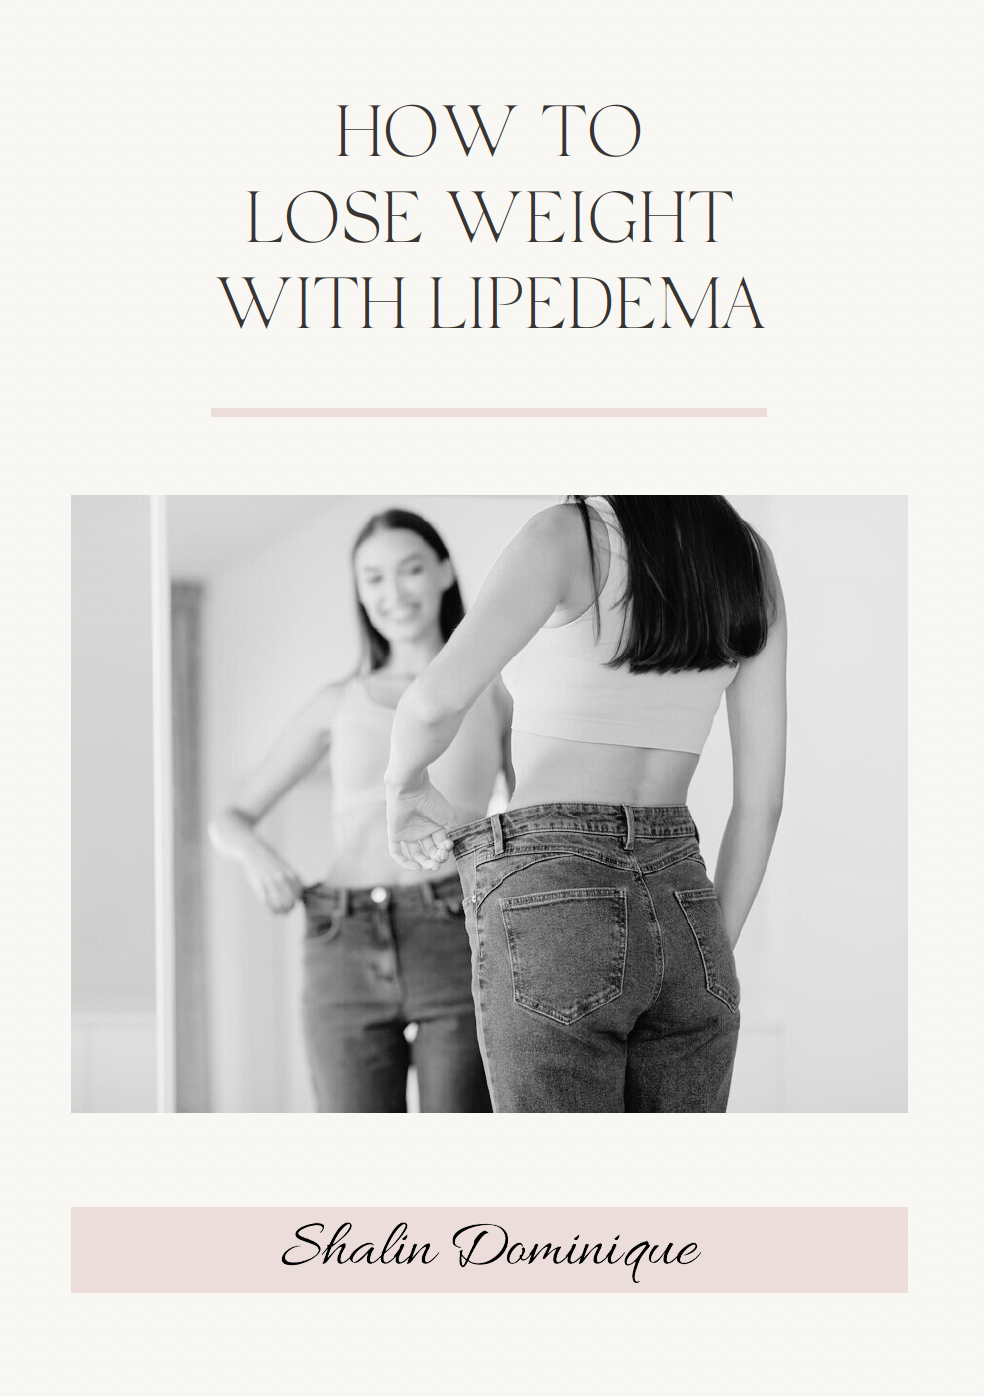 How To Lose Weight With Lipedema PDF